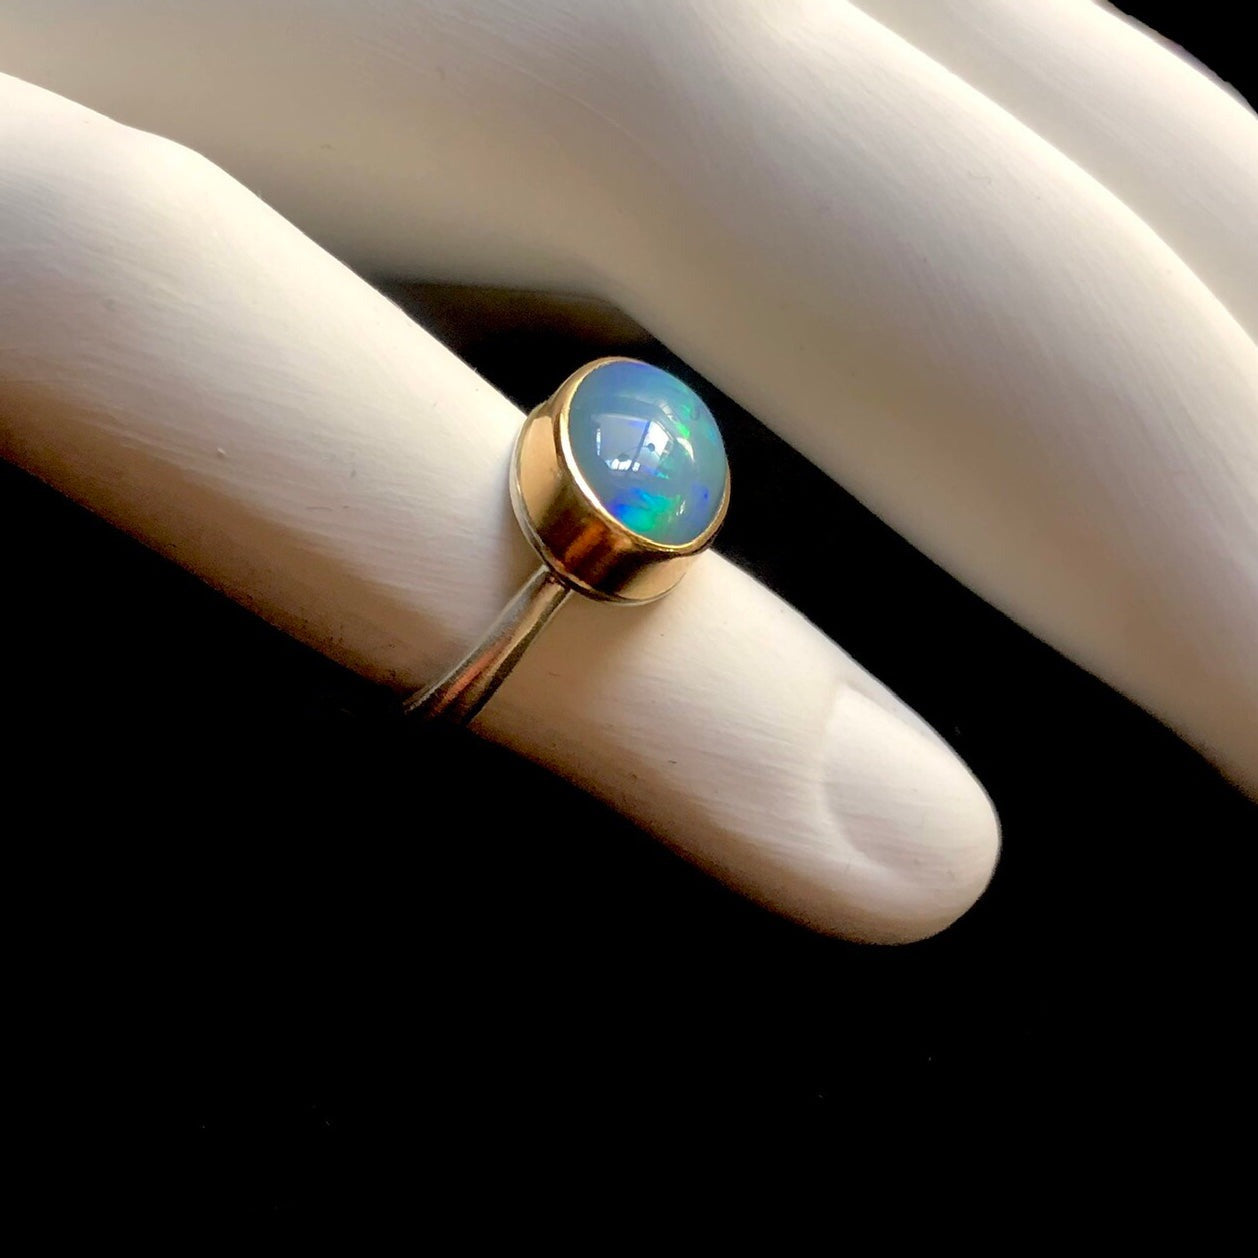 Profile side view of smooth blue opal stone with gold setting and silver band shown on white ceramic finger